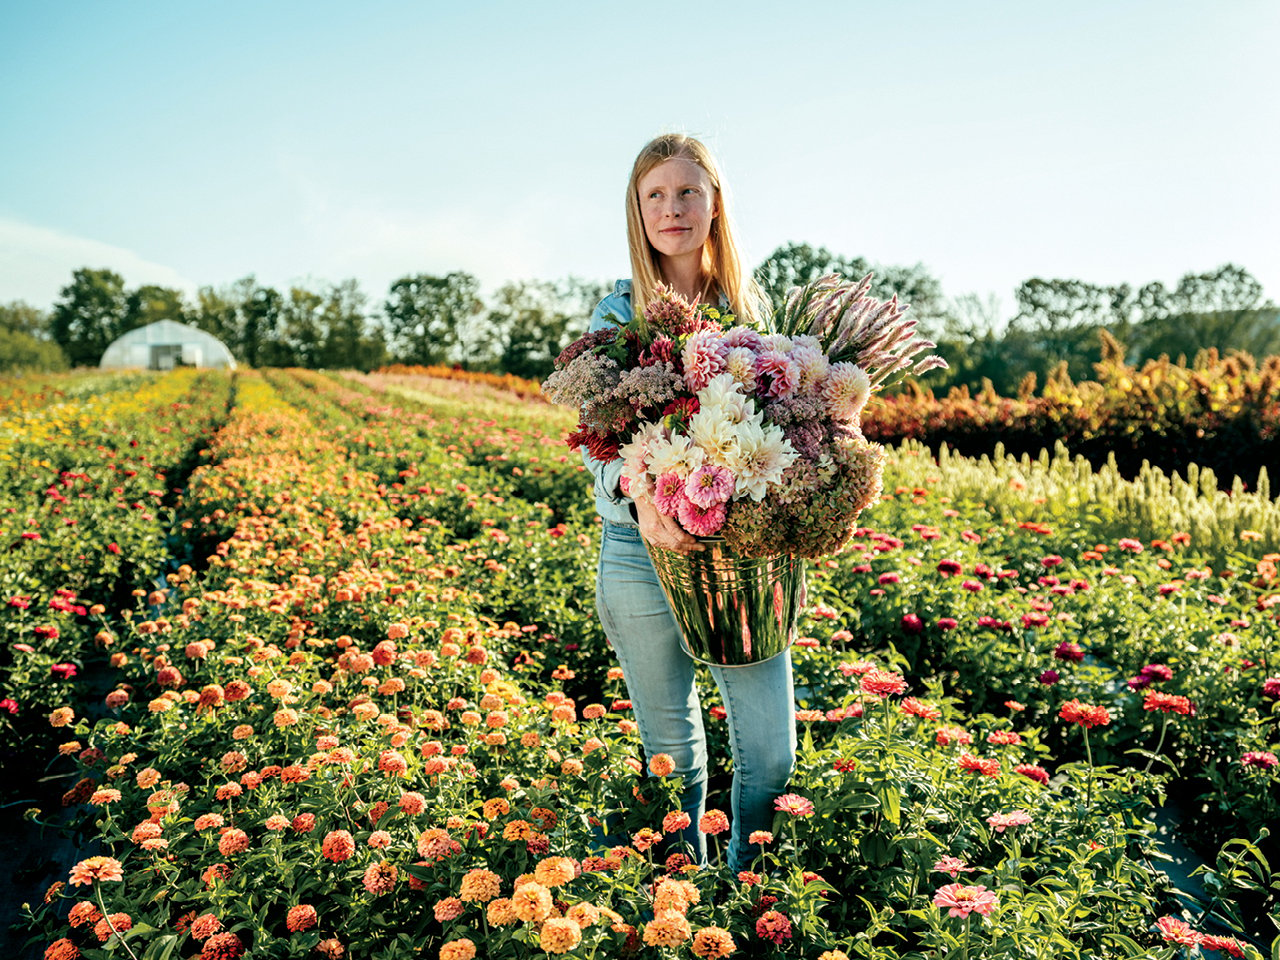 A woman holding a massive bucket of flowers in a field of dahlias